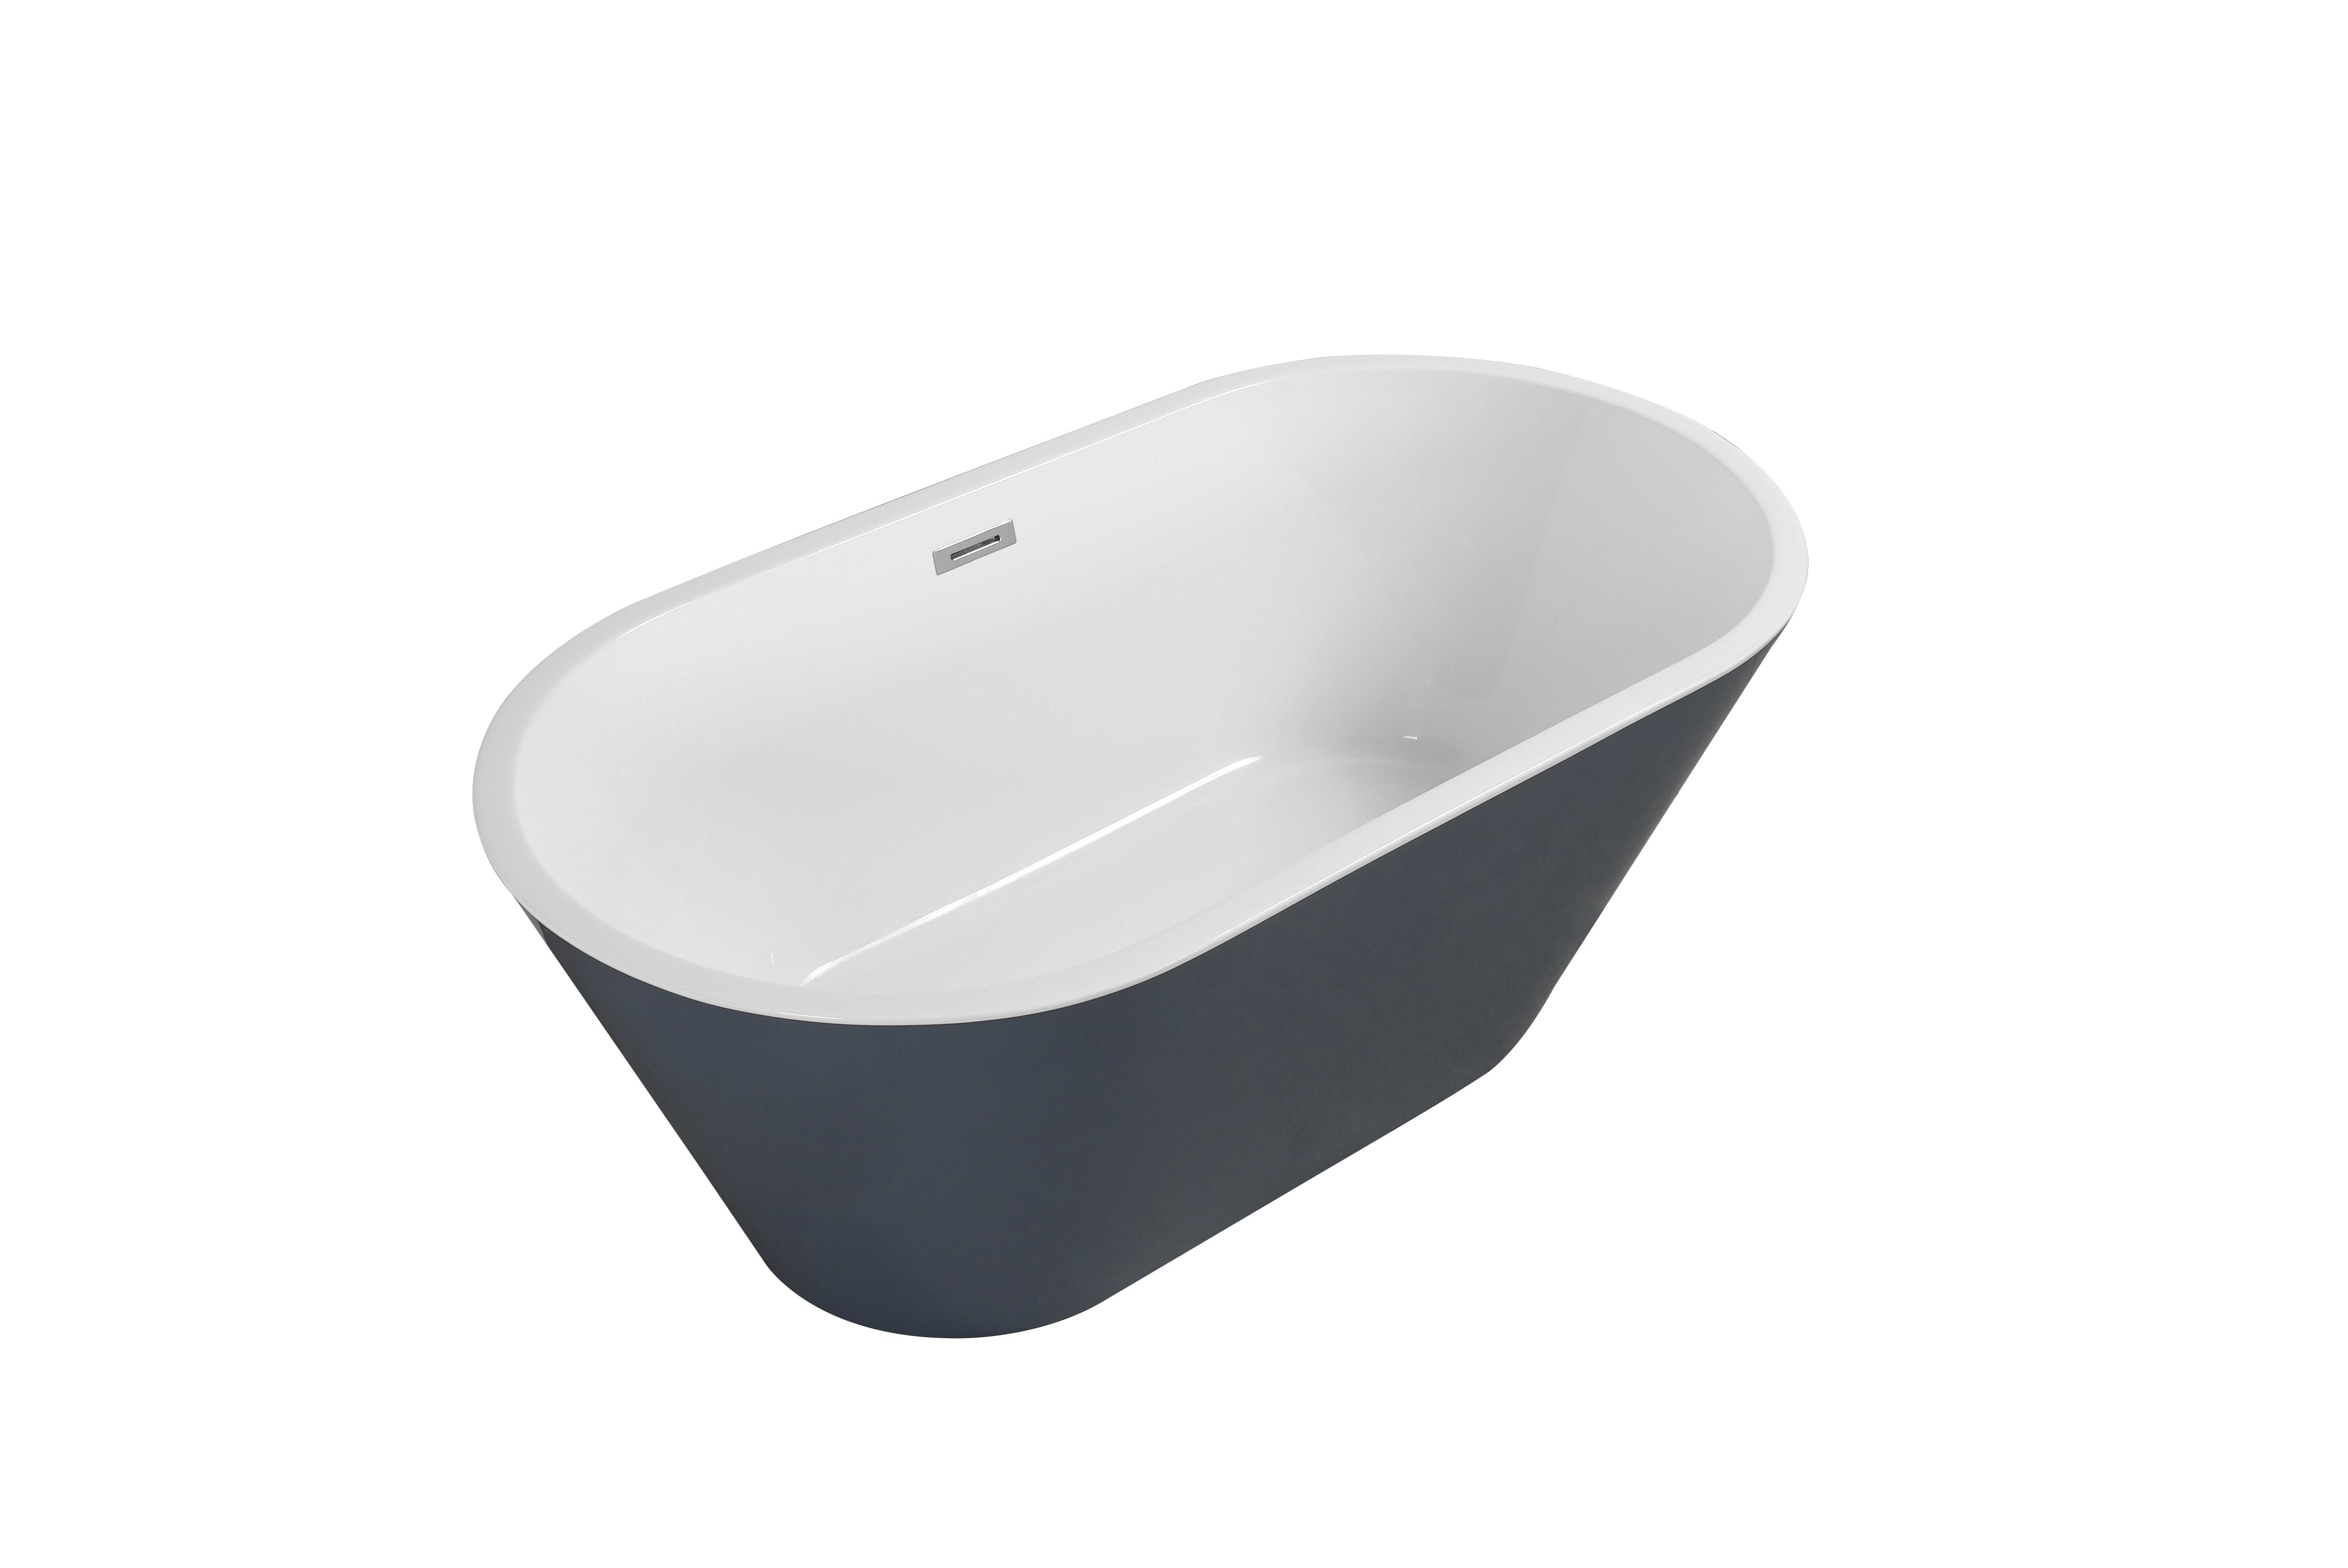 SkySea Bath Tub 59 White Outsid and Grey Exterior Free Standing Soaker, Center Drain And Overflow